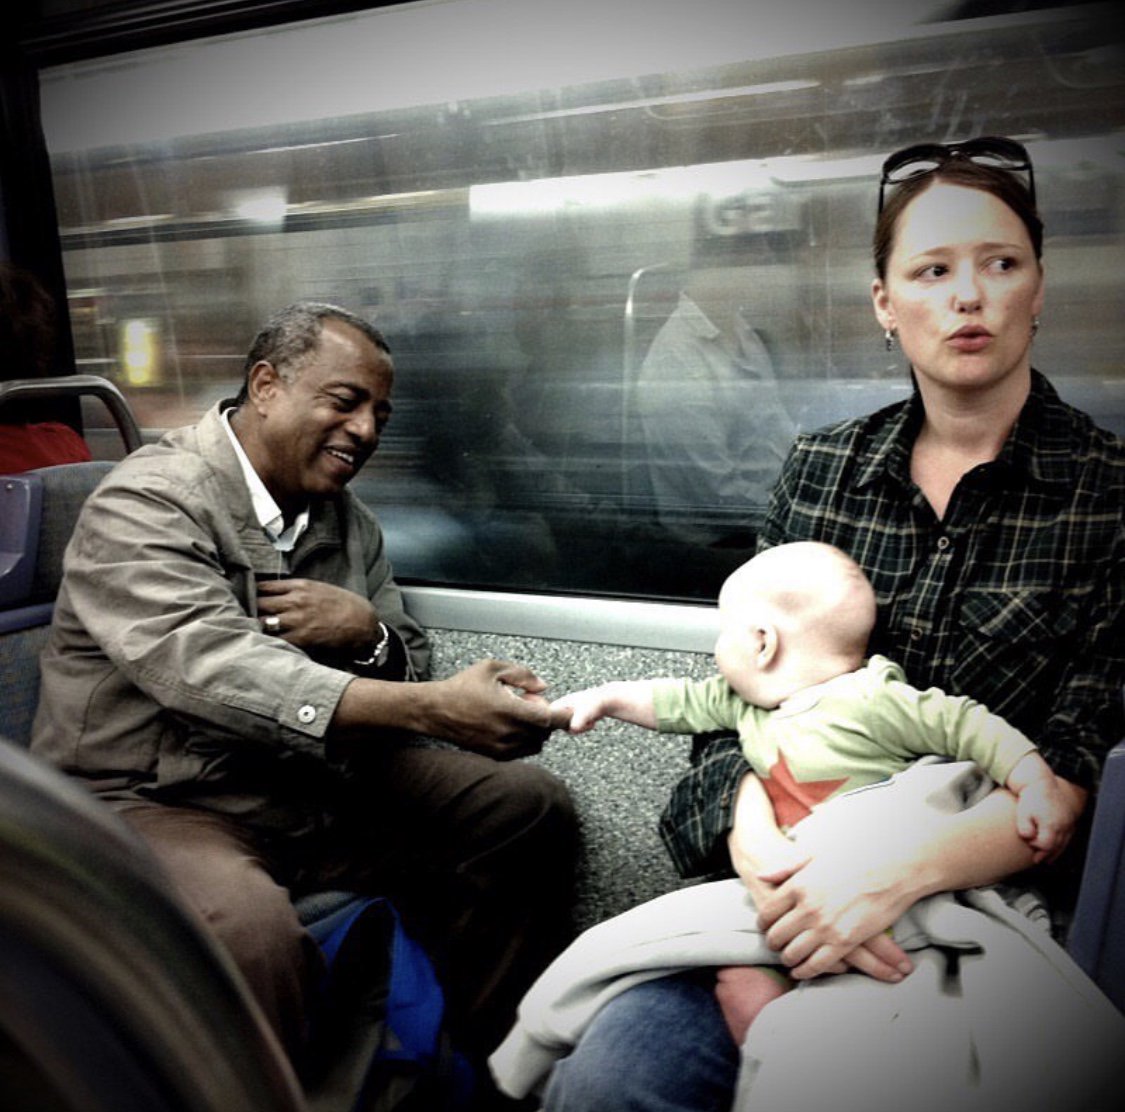 A Moment On The Metro - by Sean Bonner